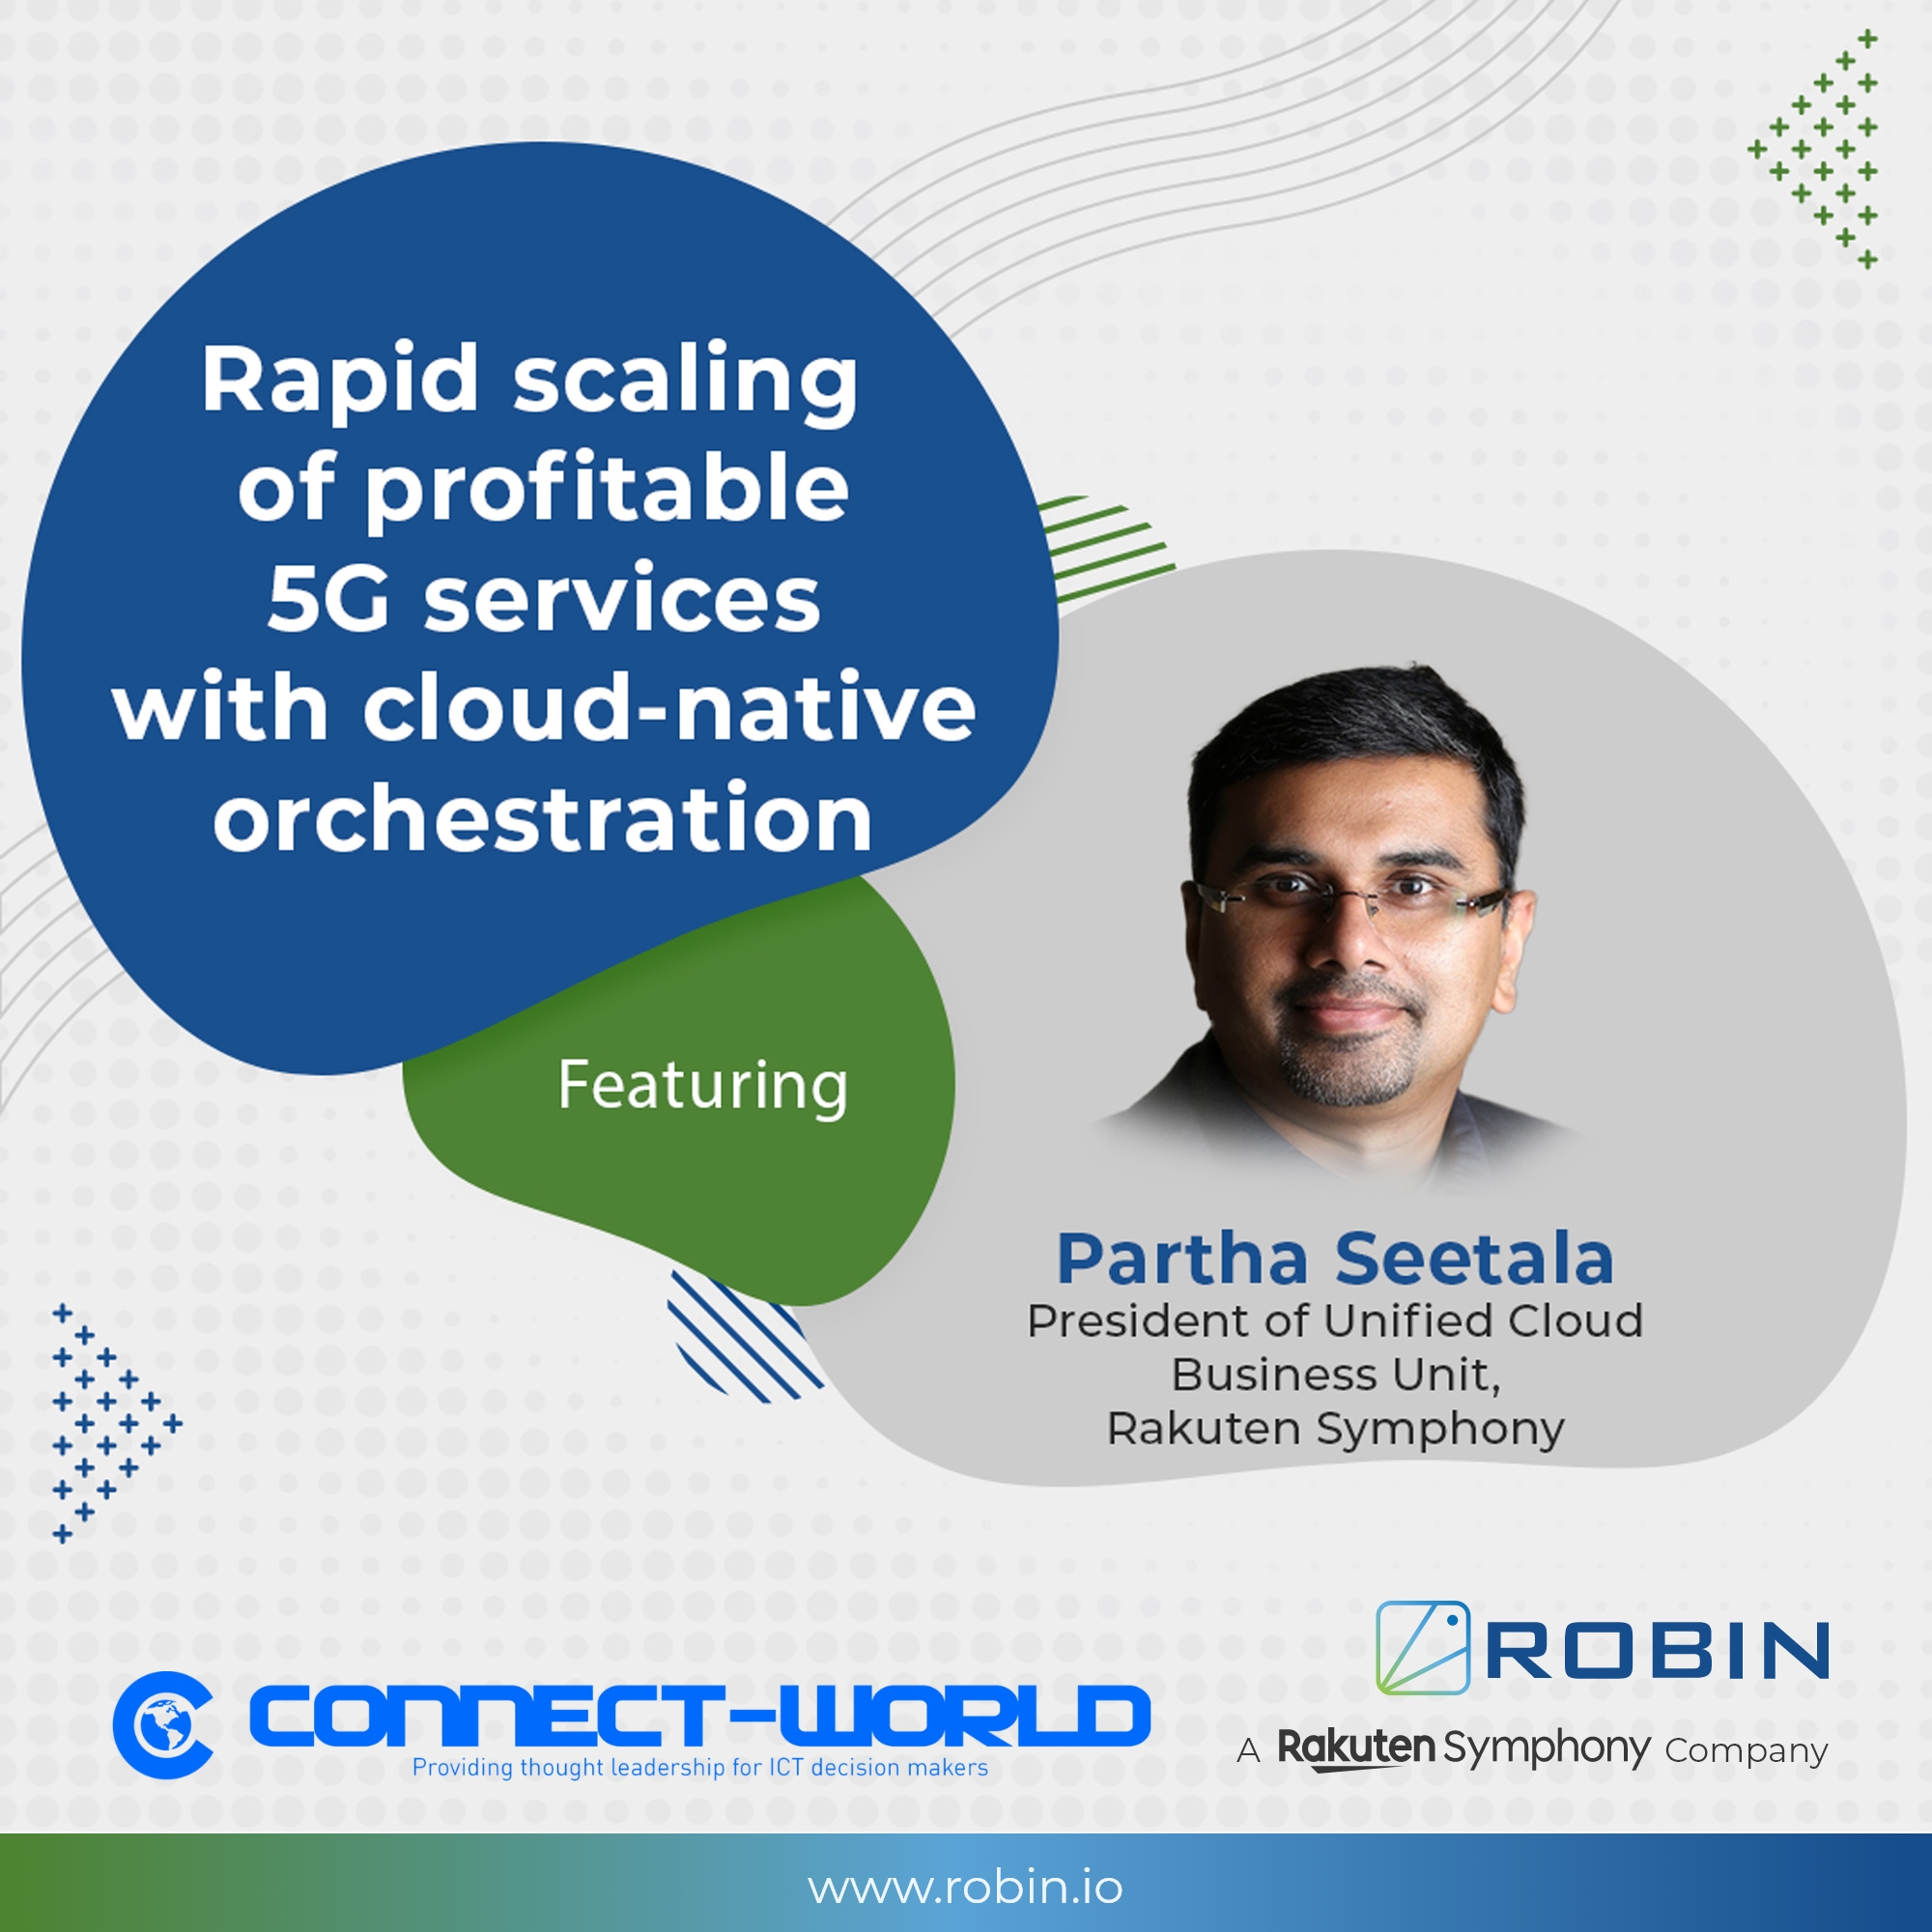 Rapid scaling of profitable 5G services with cloud-native orchestration  